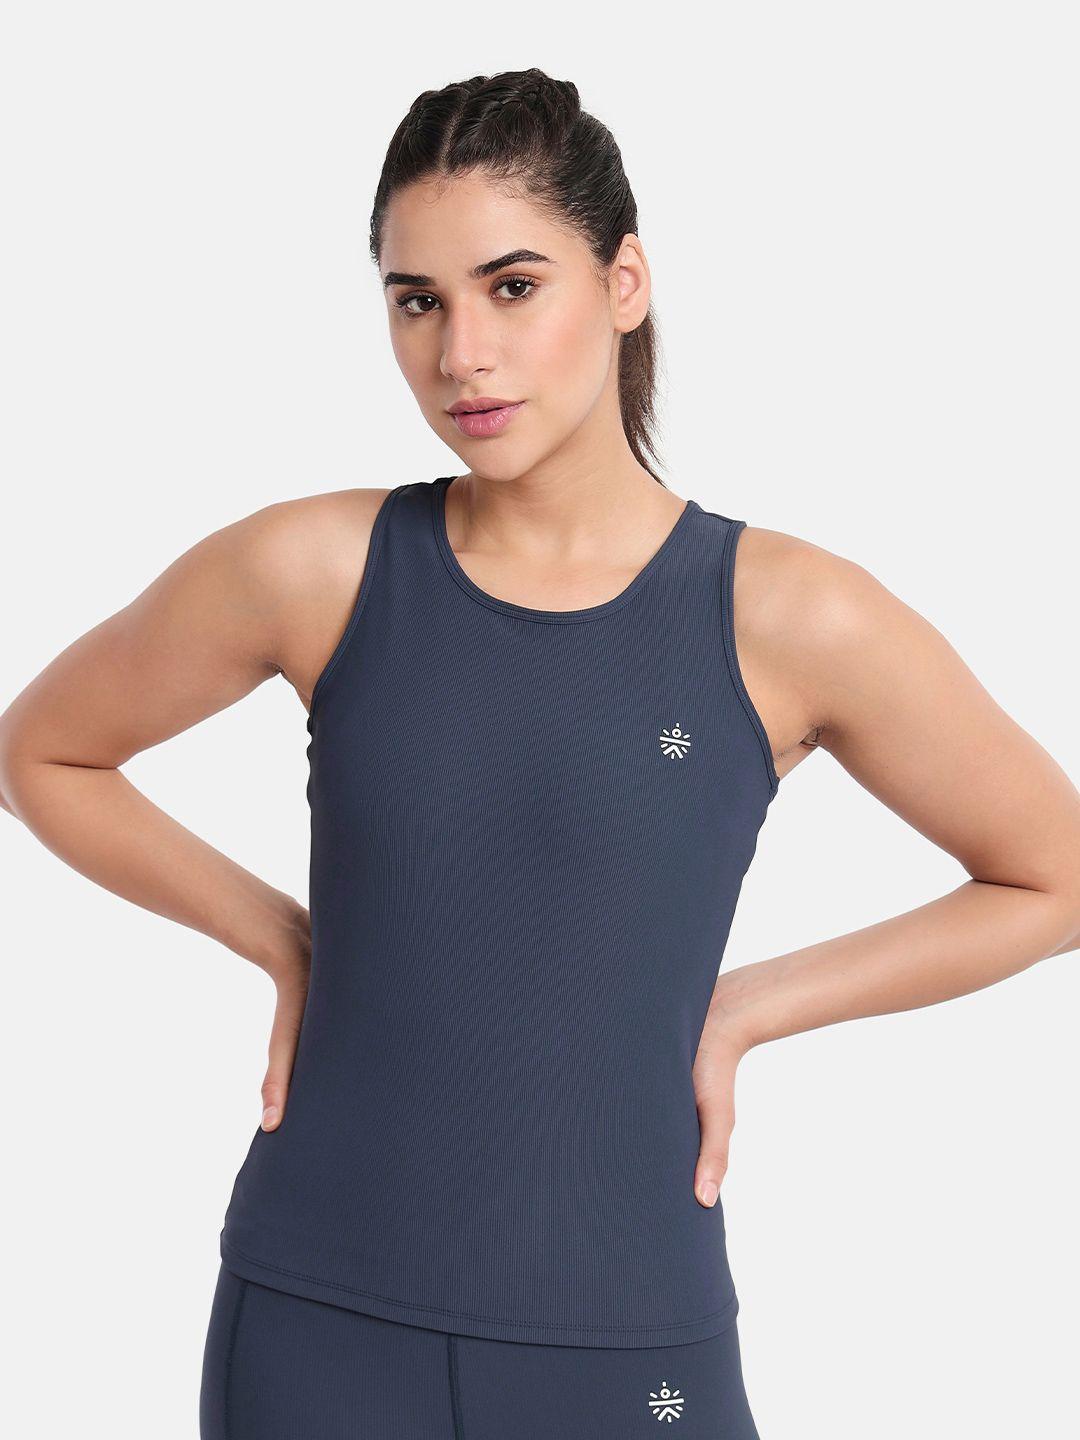 cultsport round neck racerback ribbed sports tank top